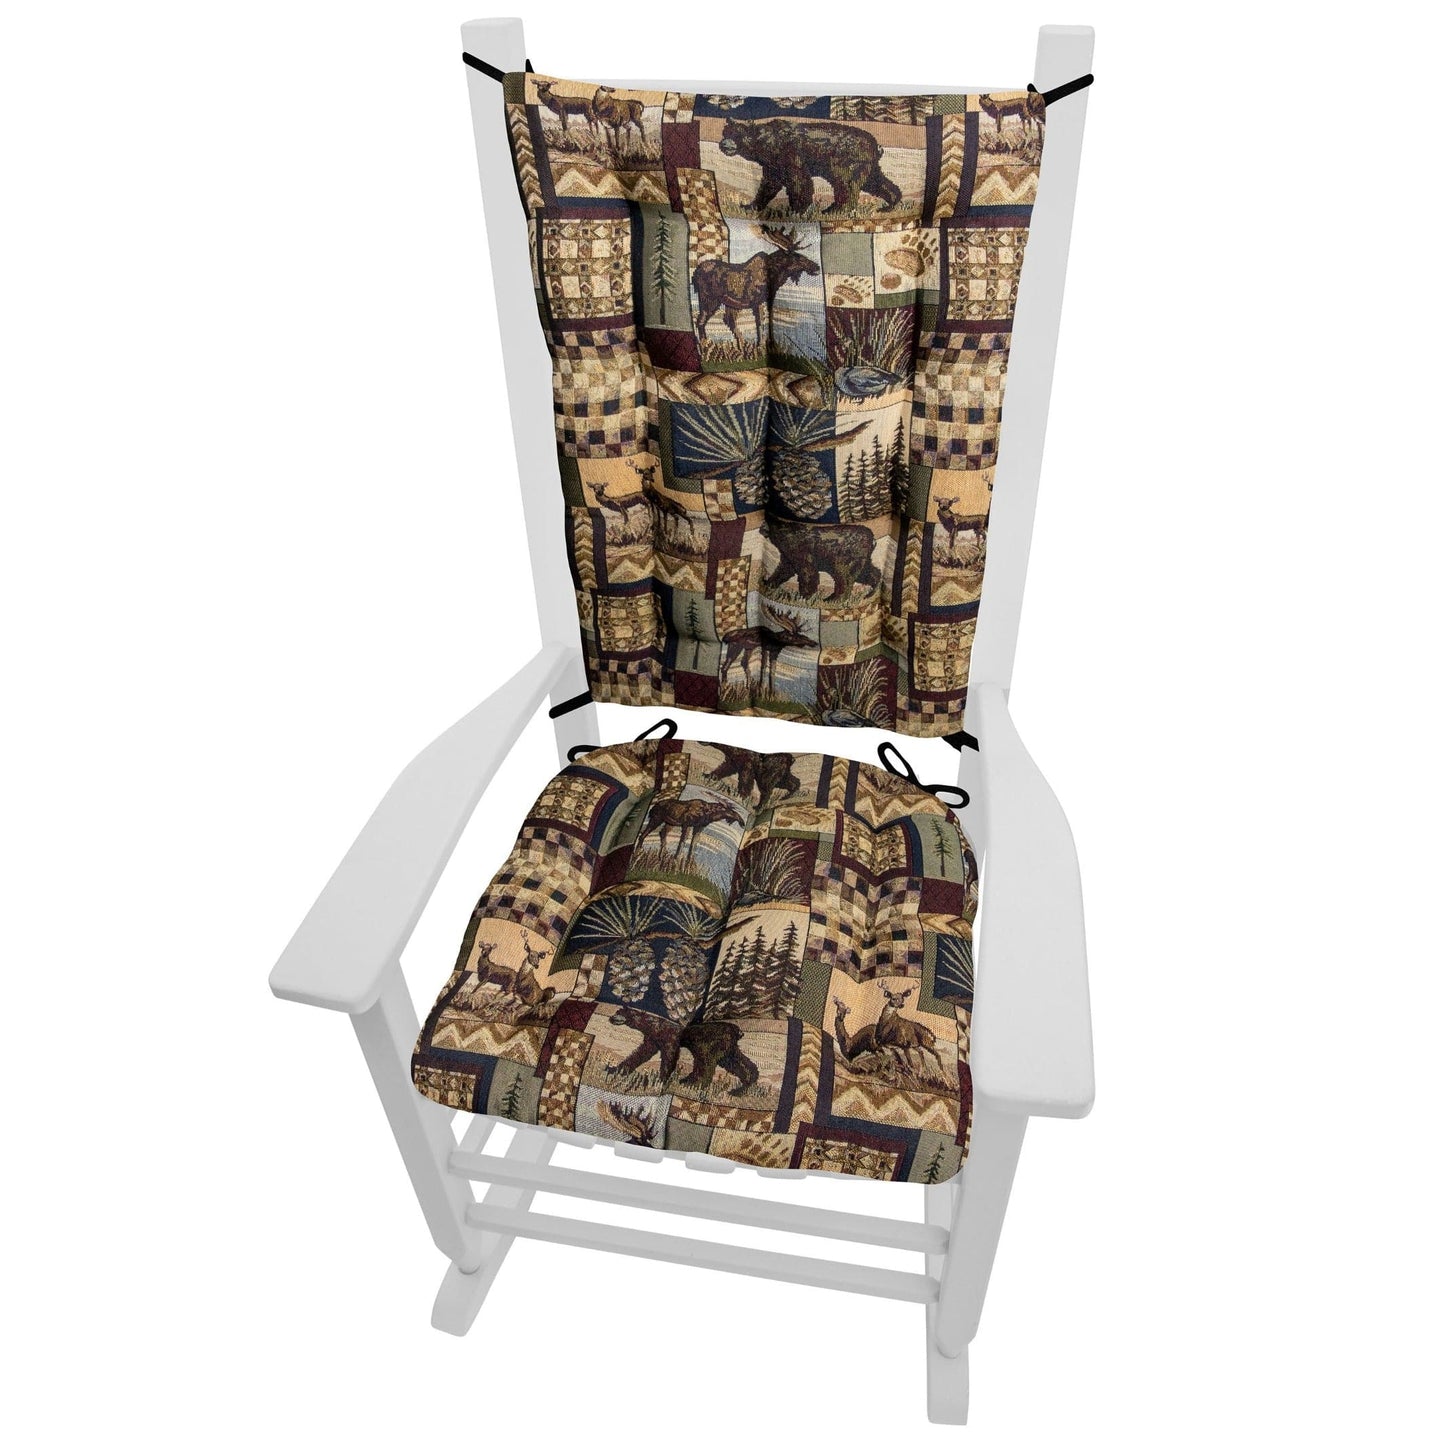 Woodlands Peters Cabin Rocking Chair Cushions - Barnett Home Decor - Taupe, Brown, & Black